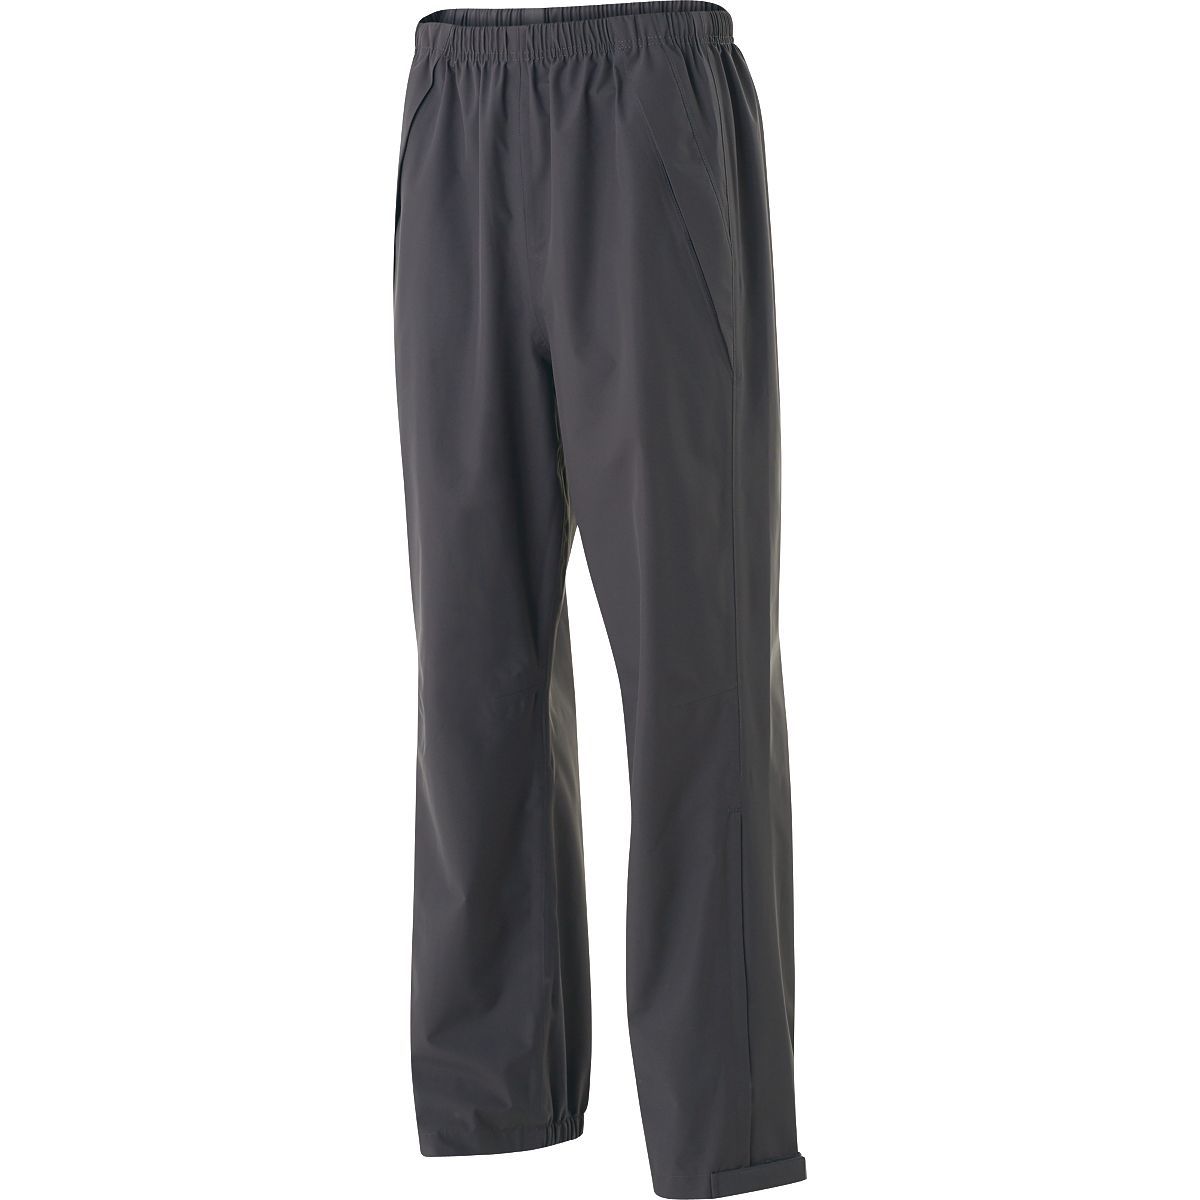 Holloway Circulate Pant in Carbon  -Part of the Adult, Adult-Pants, Pants, Holloway product lines at KanaleyCreations.com